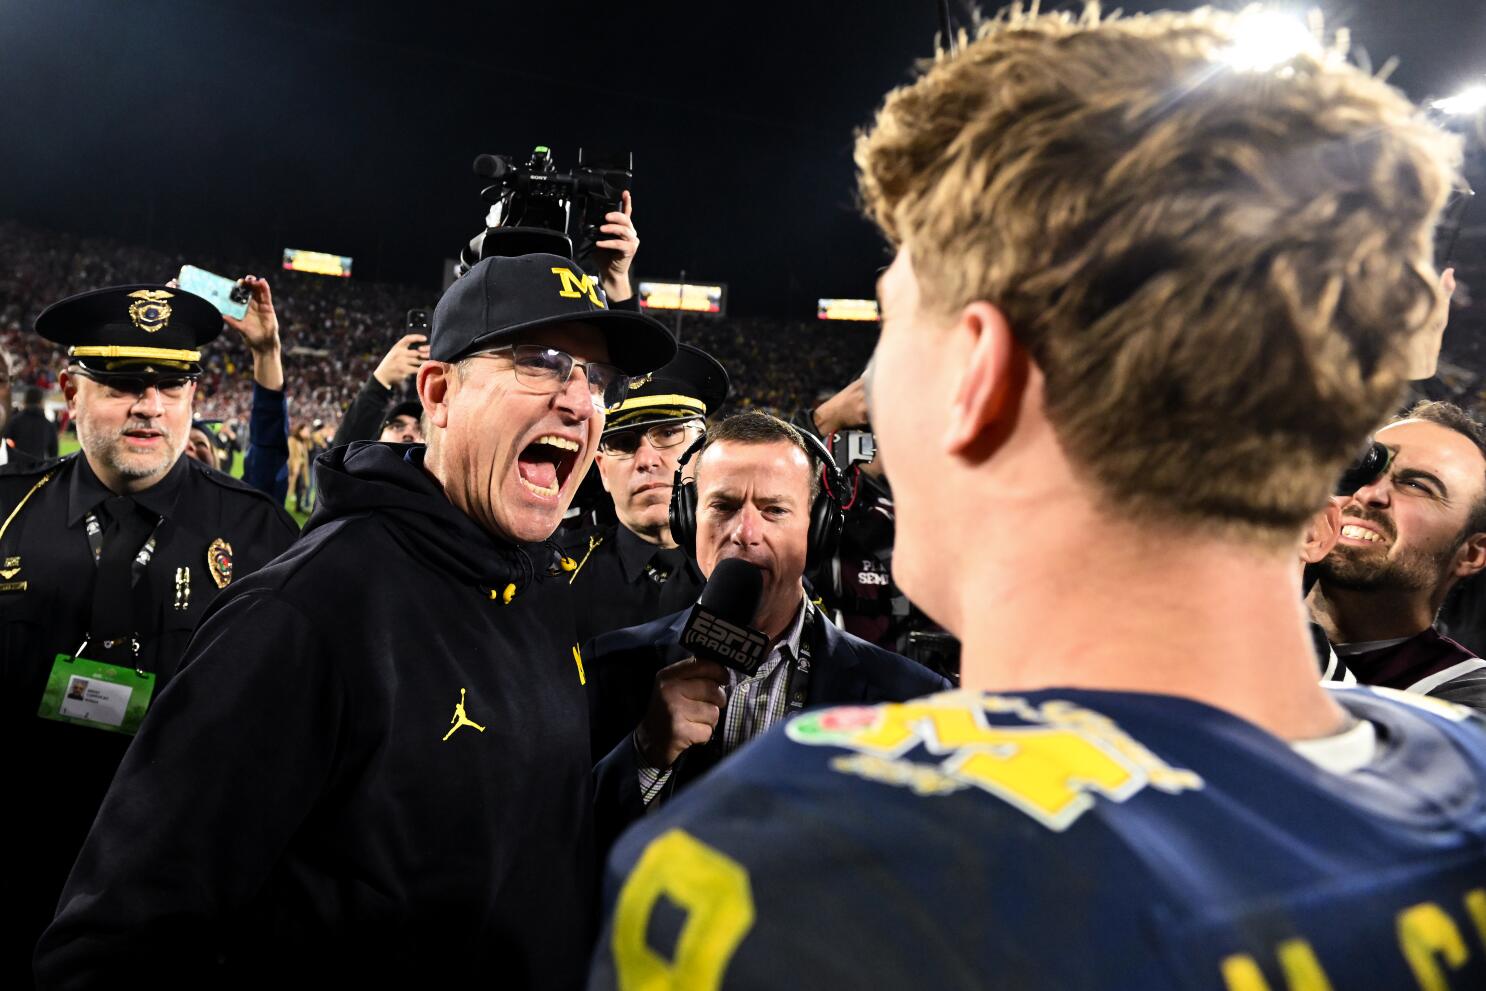 After leading Michigan to glory, send Jim Harbaugh to the Chargers